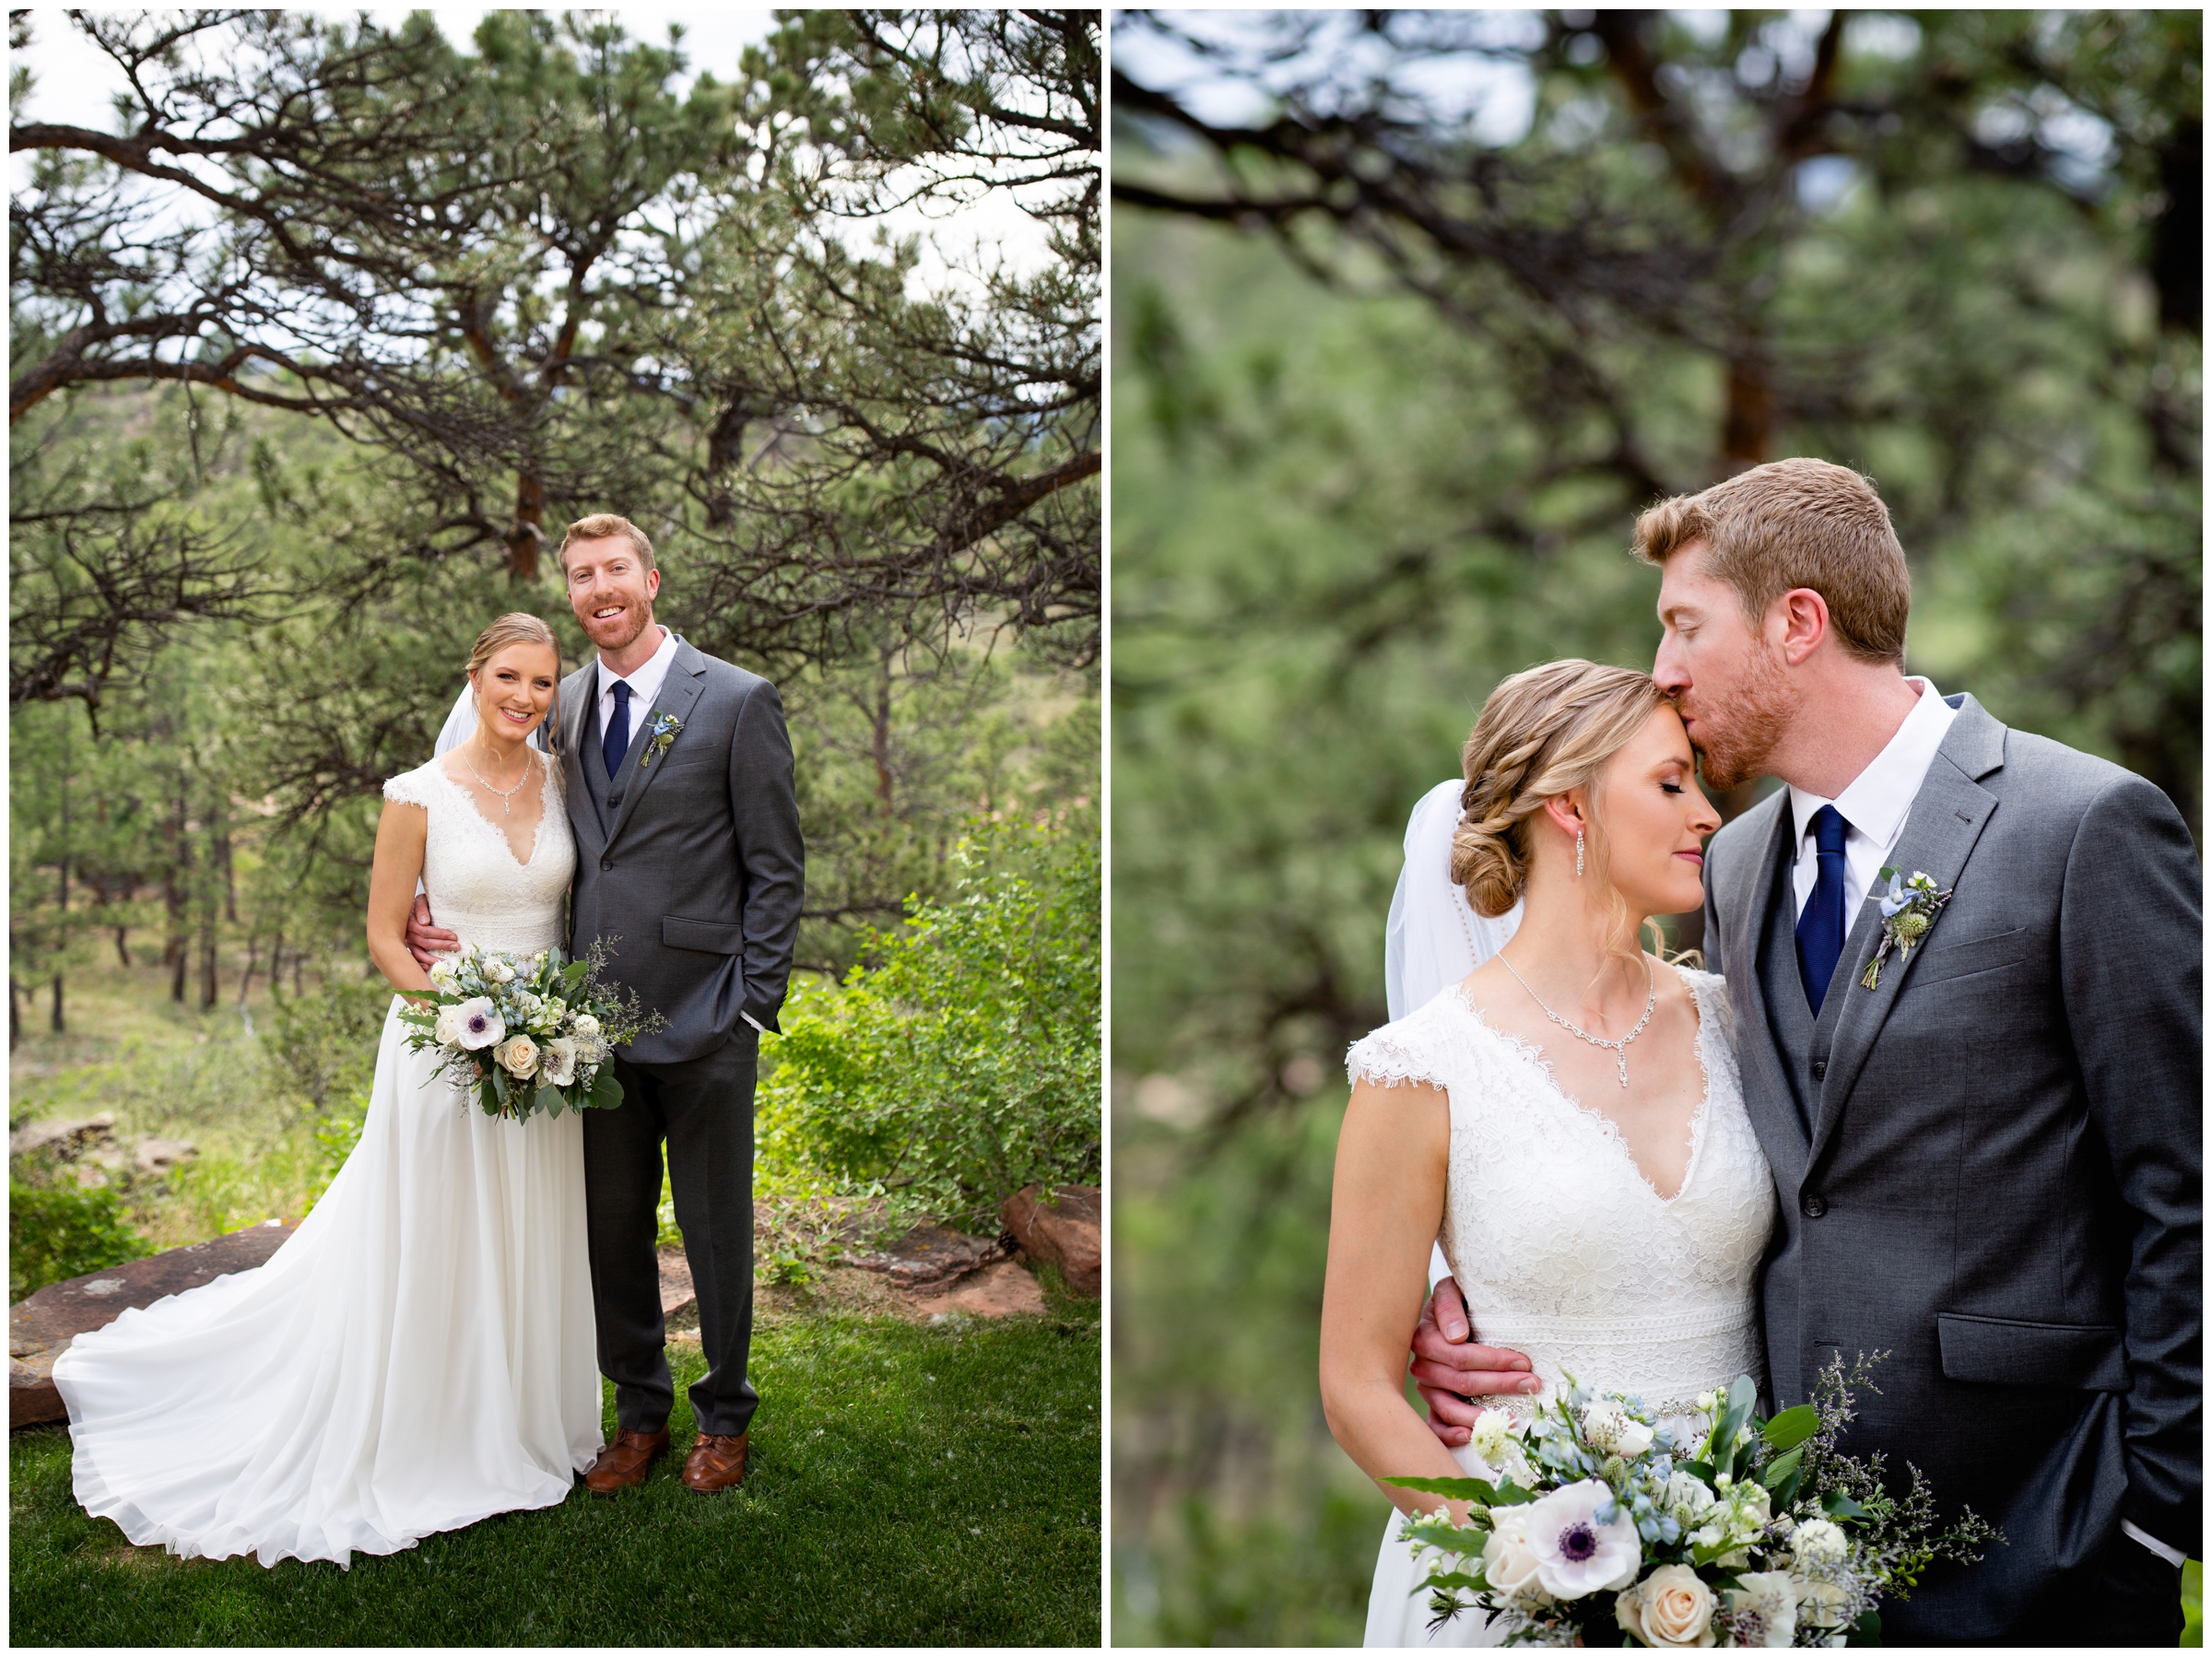 Summer mountain wedding at Lionscrest Manor by Lyons Colorado photographer Plum Pretty Photography